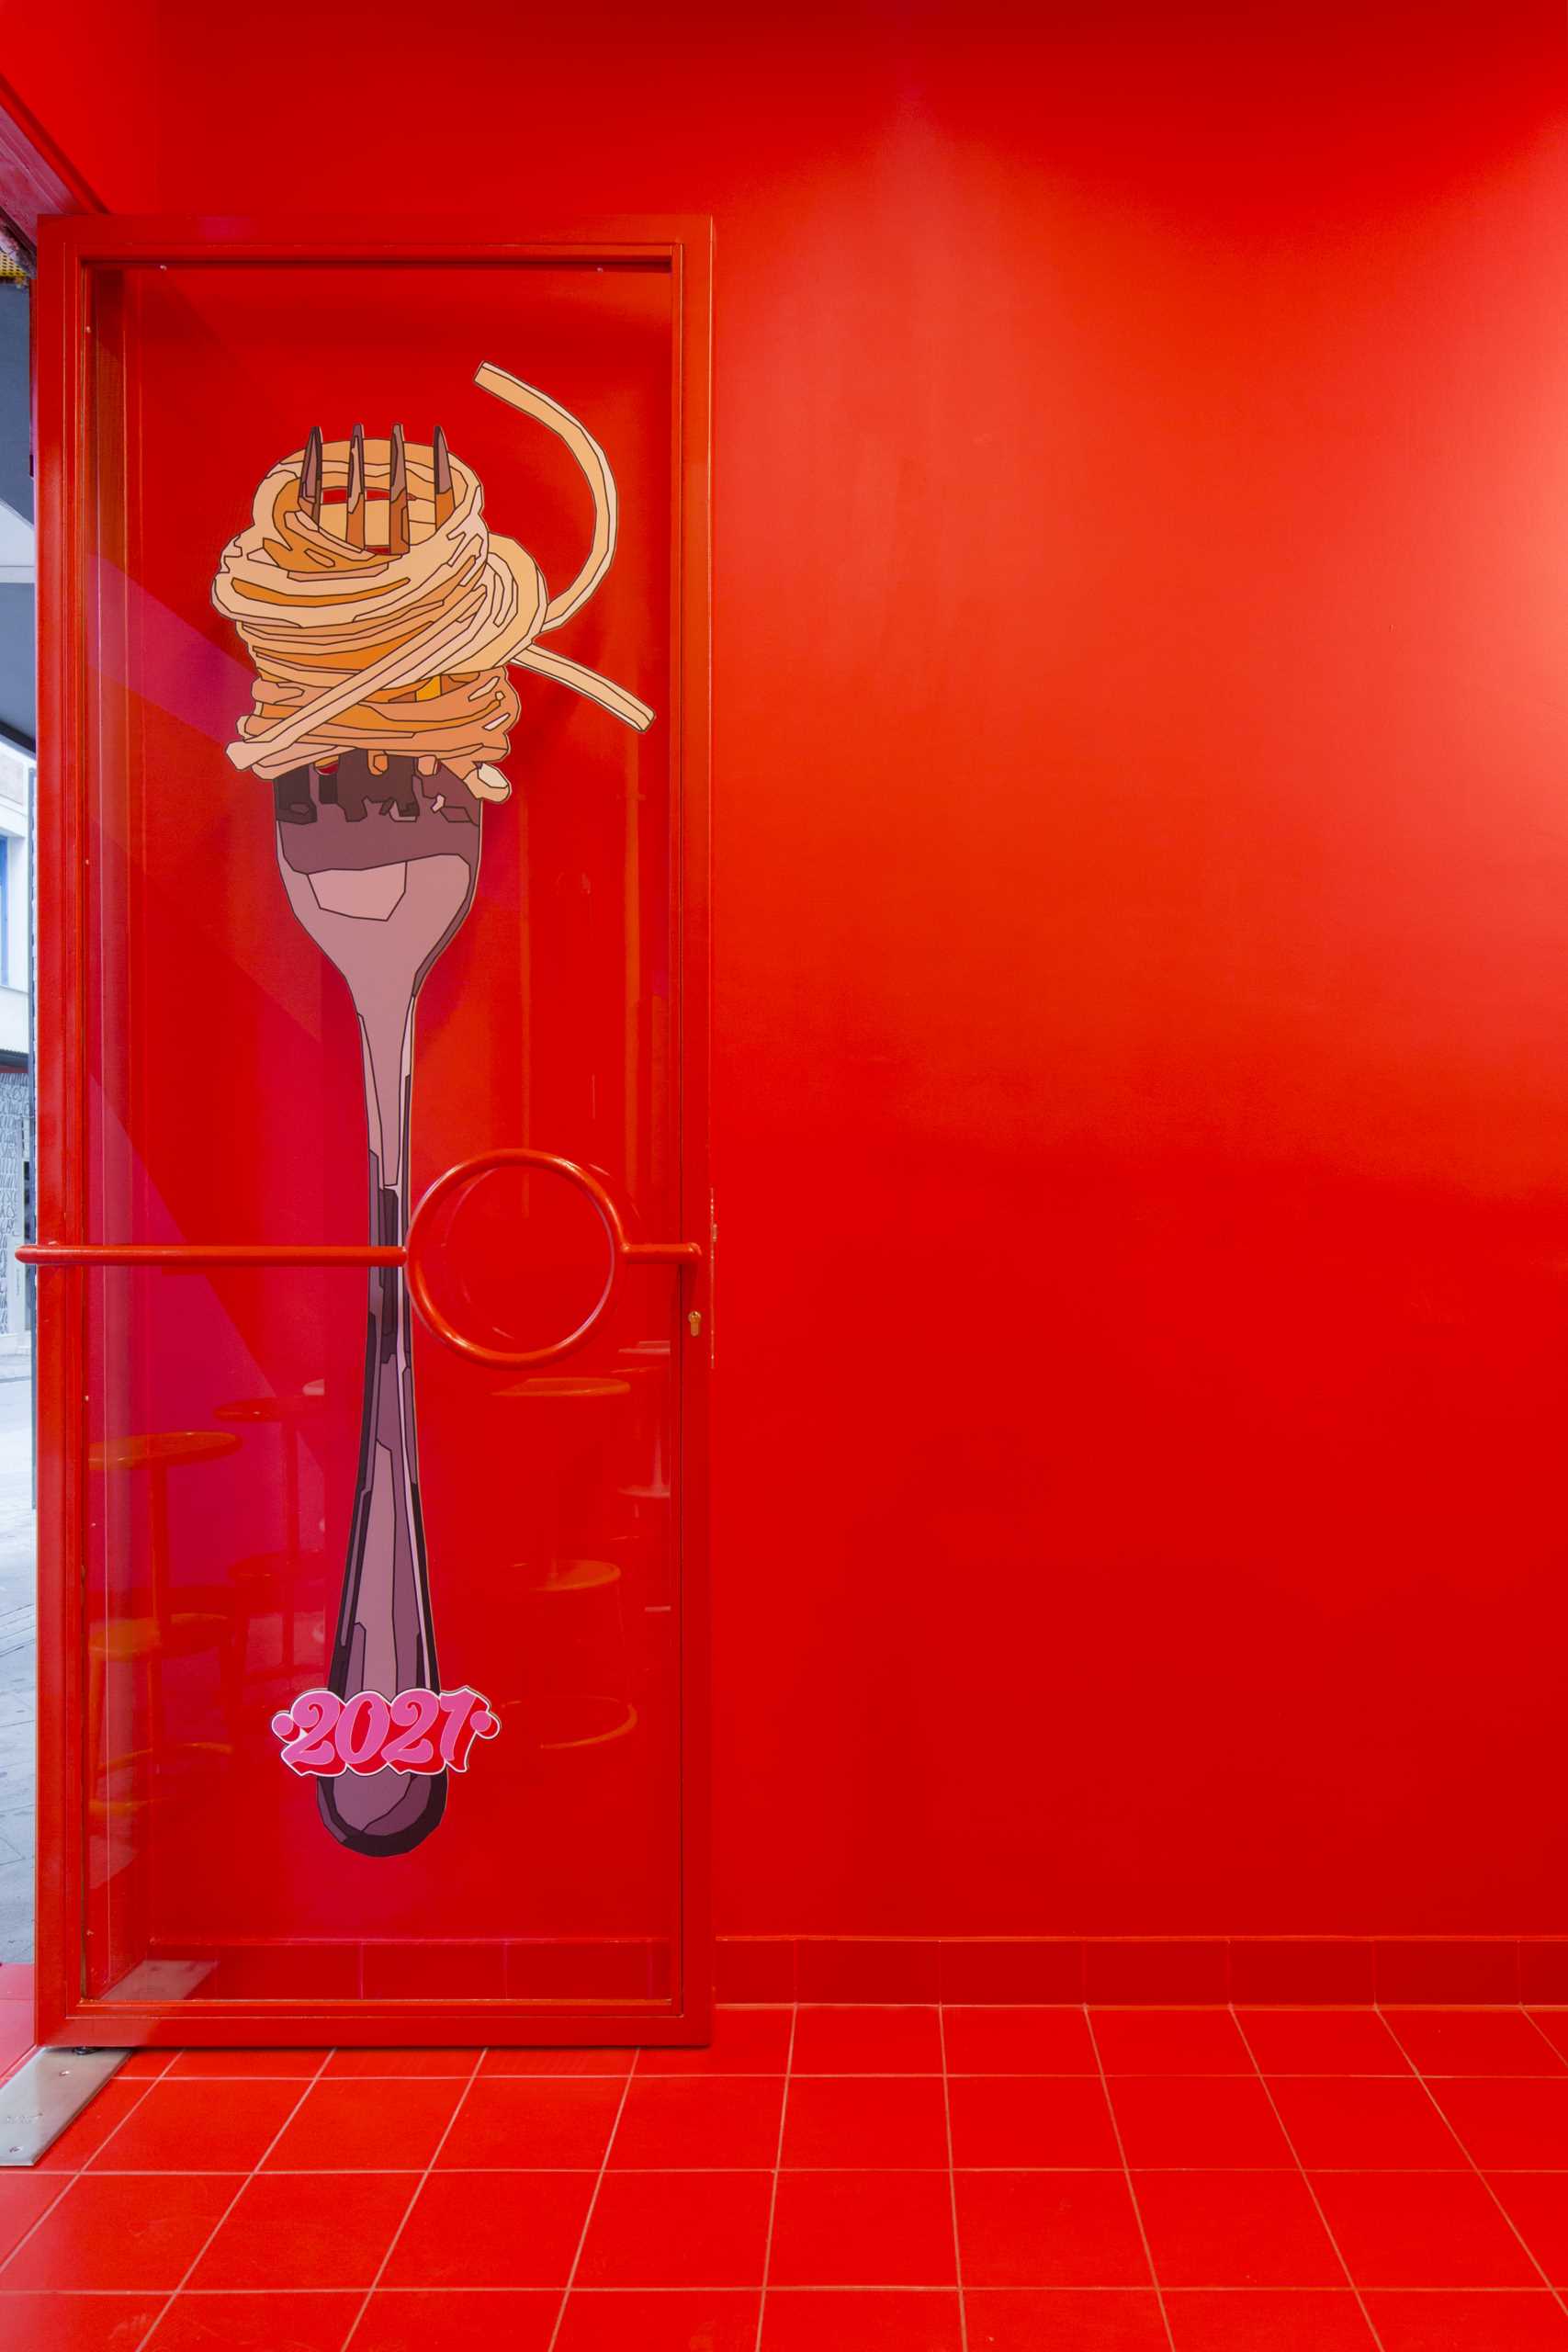 The door illustration of this pasta shop, depicts the classic pasta twirl on a fork, that works as a mouthwatering trigger for any unsuspecting passerby.